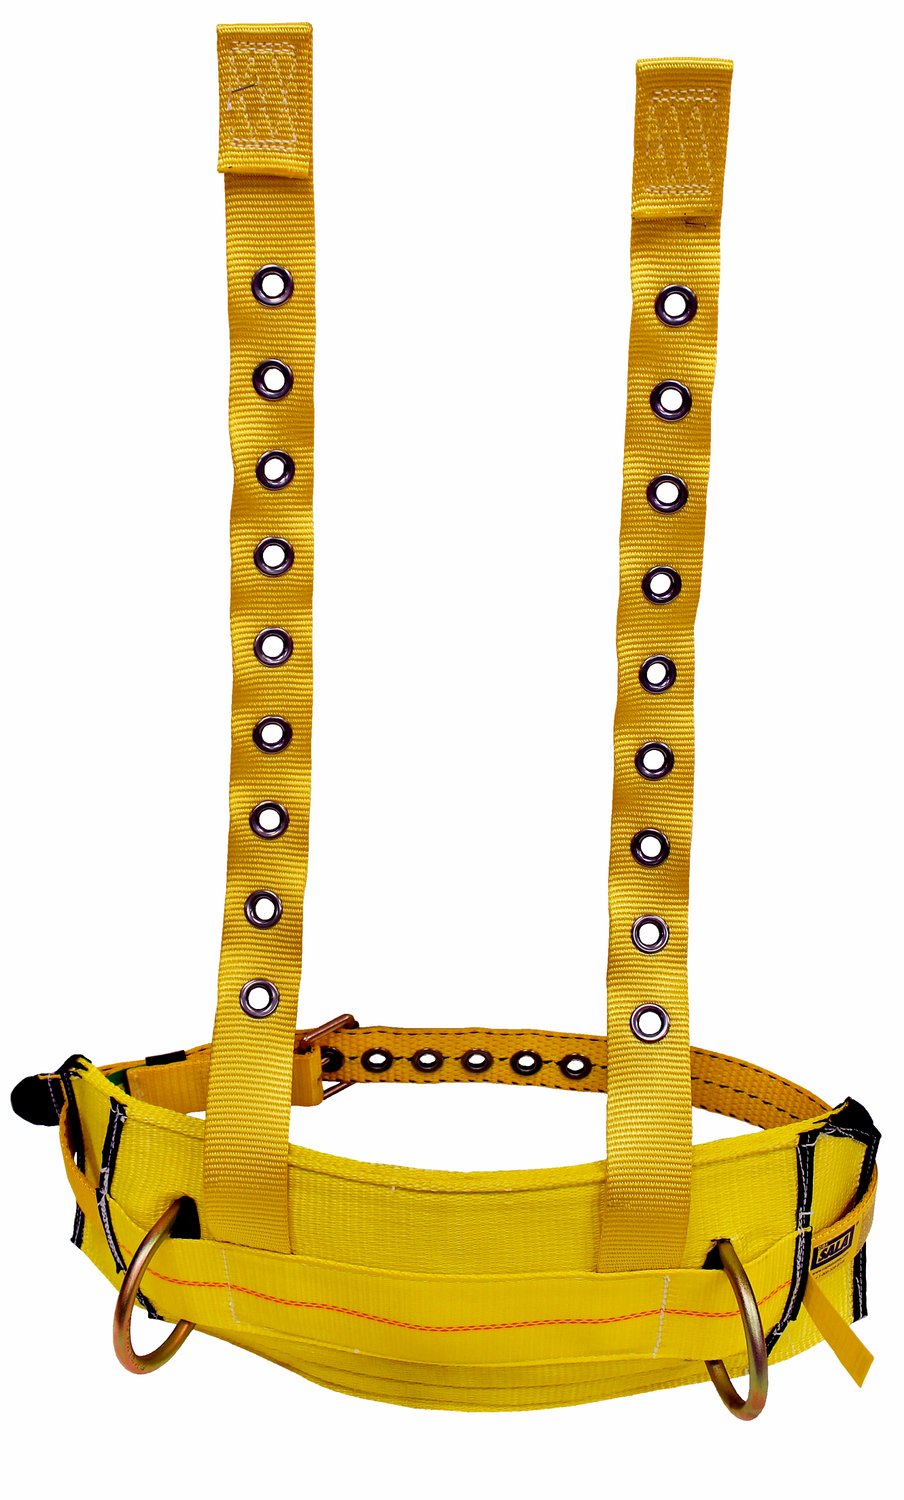 7100241696 - 3M DBI-SALA Derrick Tongue Buckle Positioning Belt with Tongue Buckle Harness Connector 1003222, Yellow, X-Large